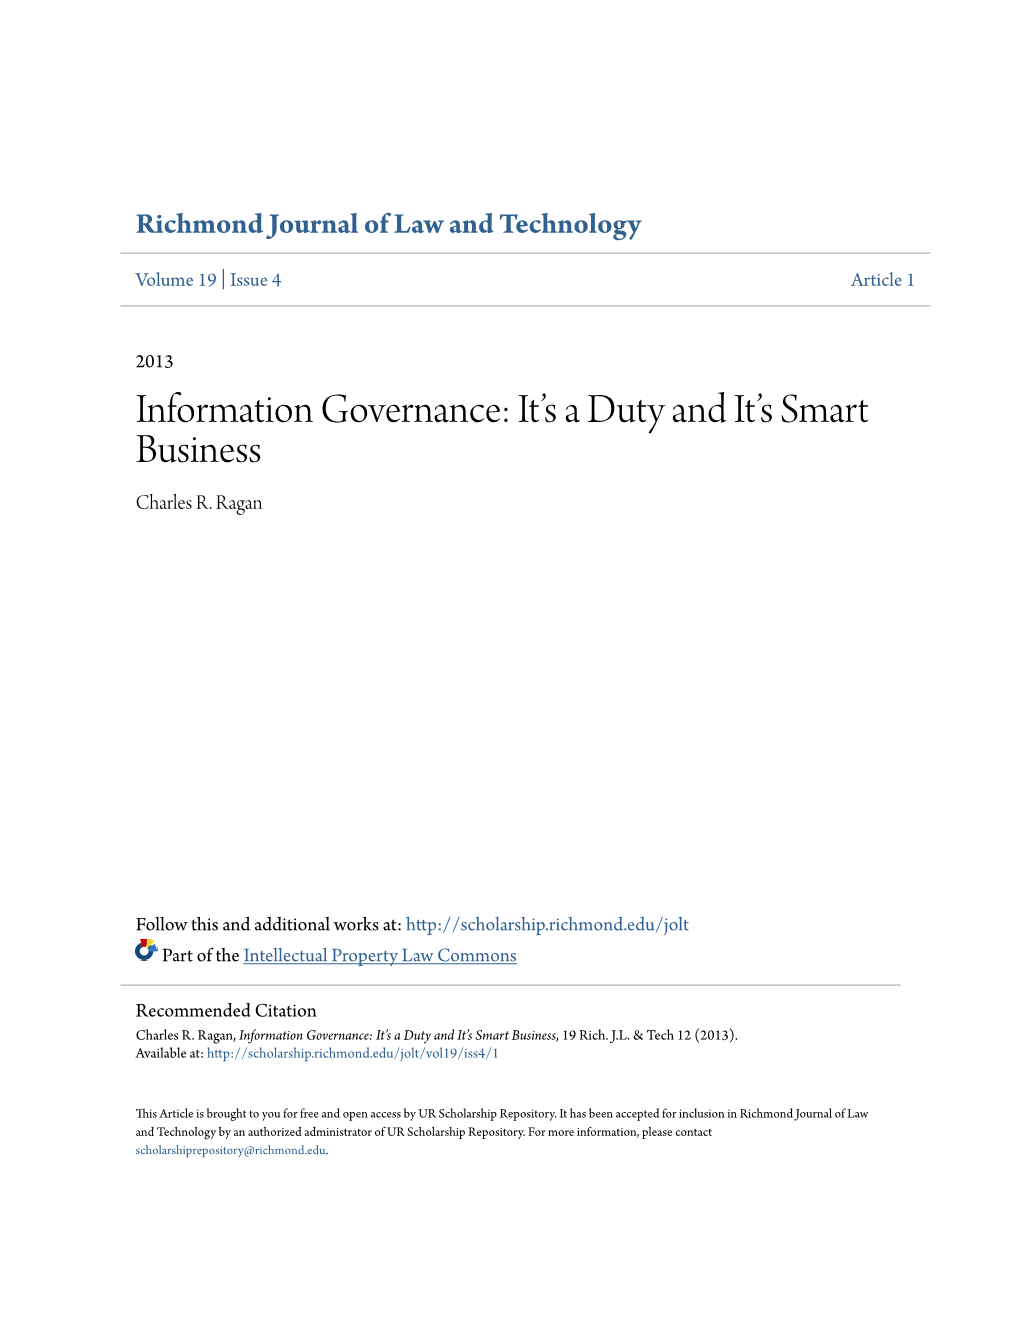 Information Governance: It’S a Duty and It’S Smart Business Charles R